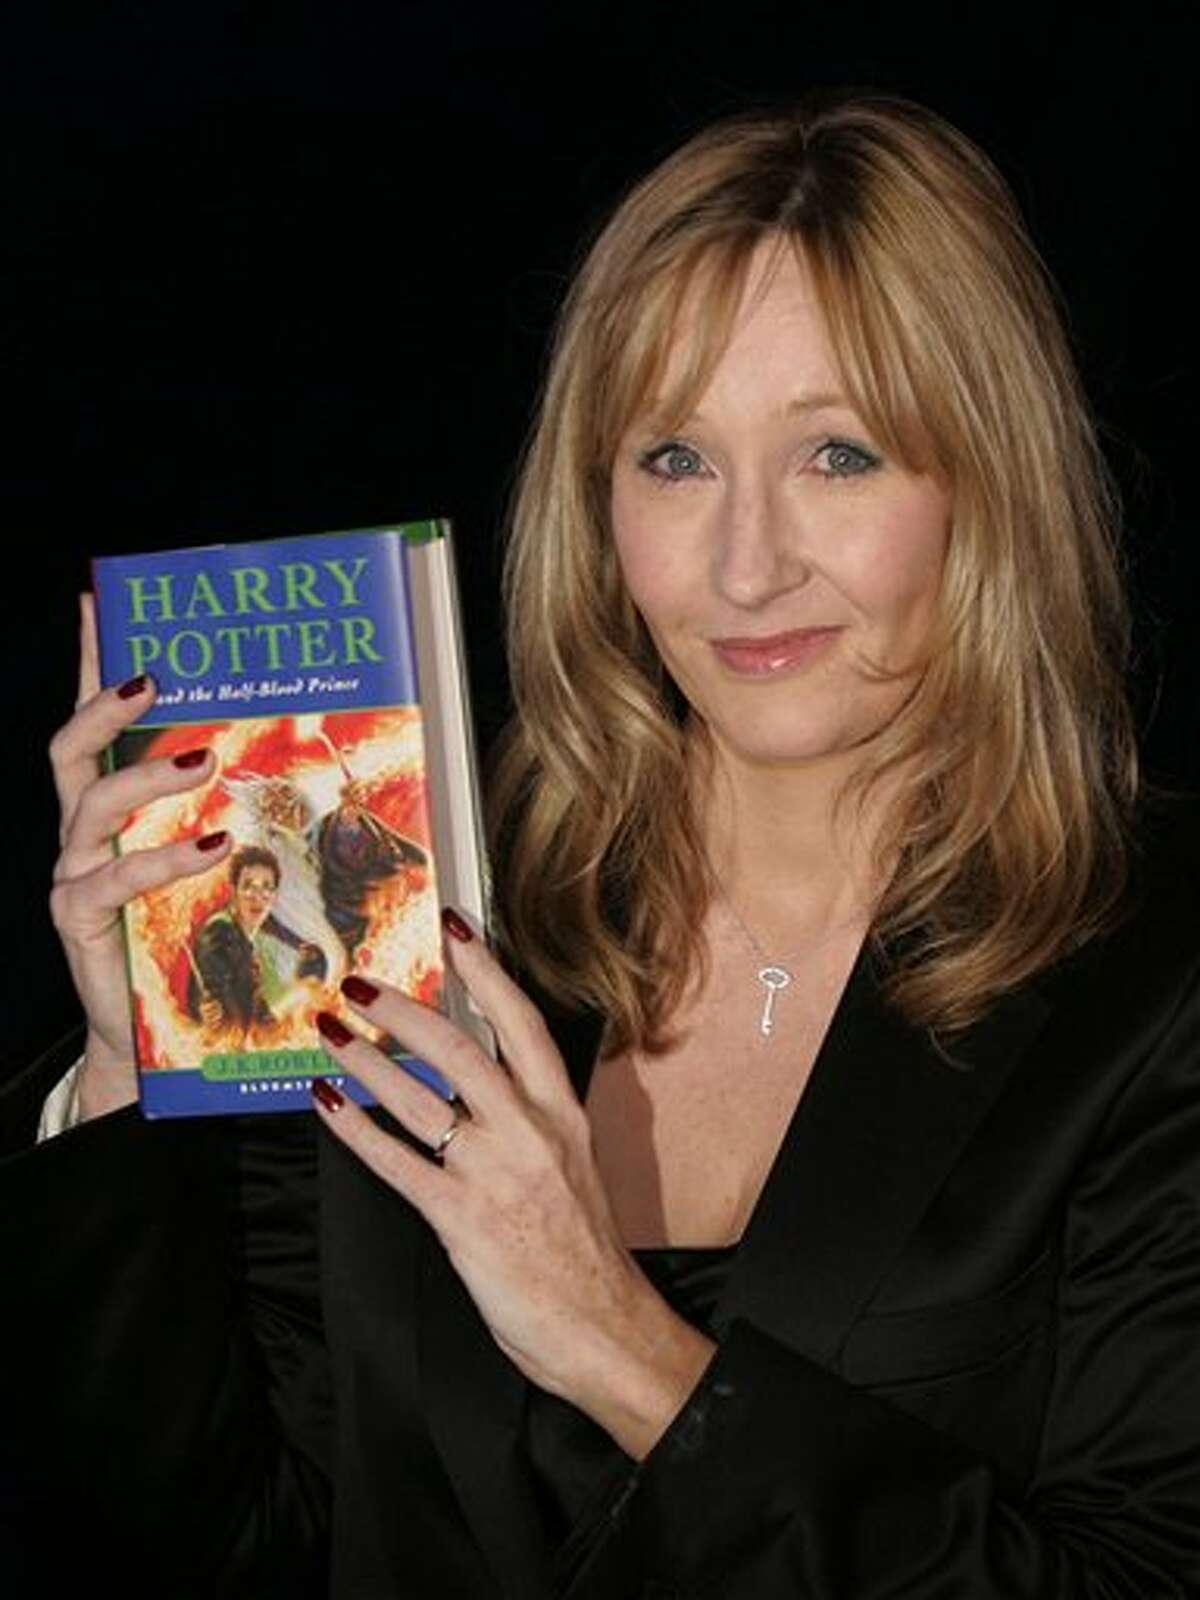 2 new Harry Potter books set to be published in October - WSVN